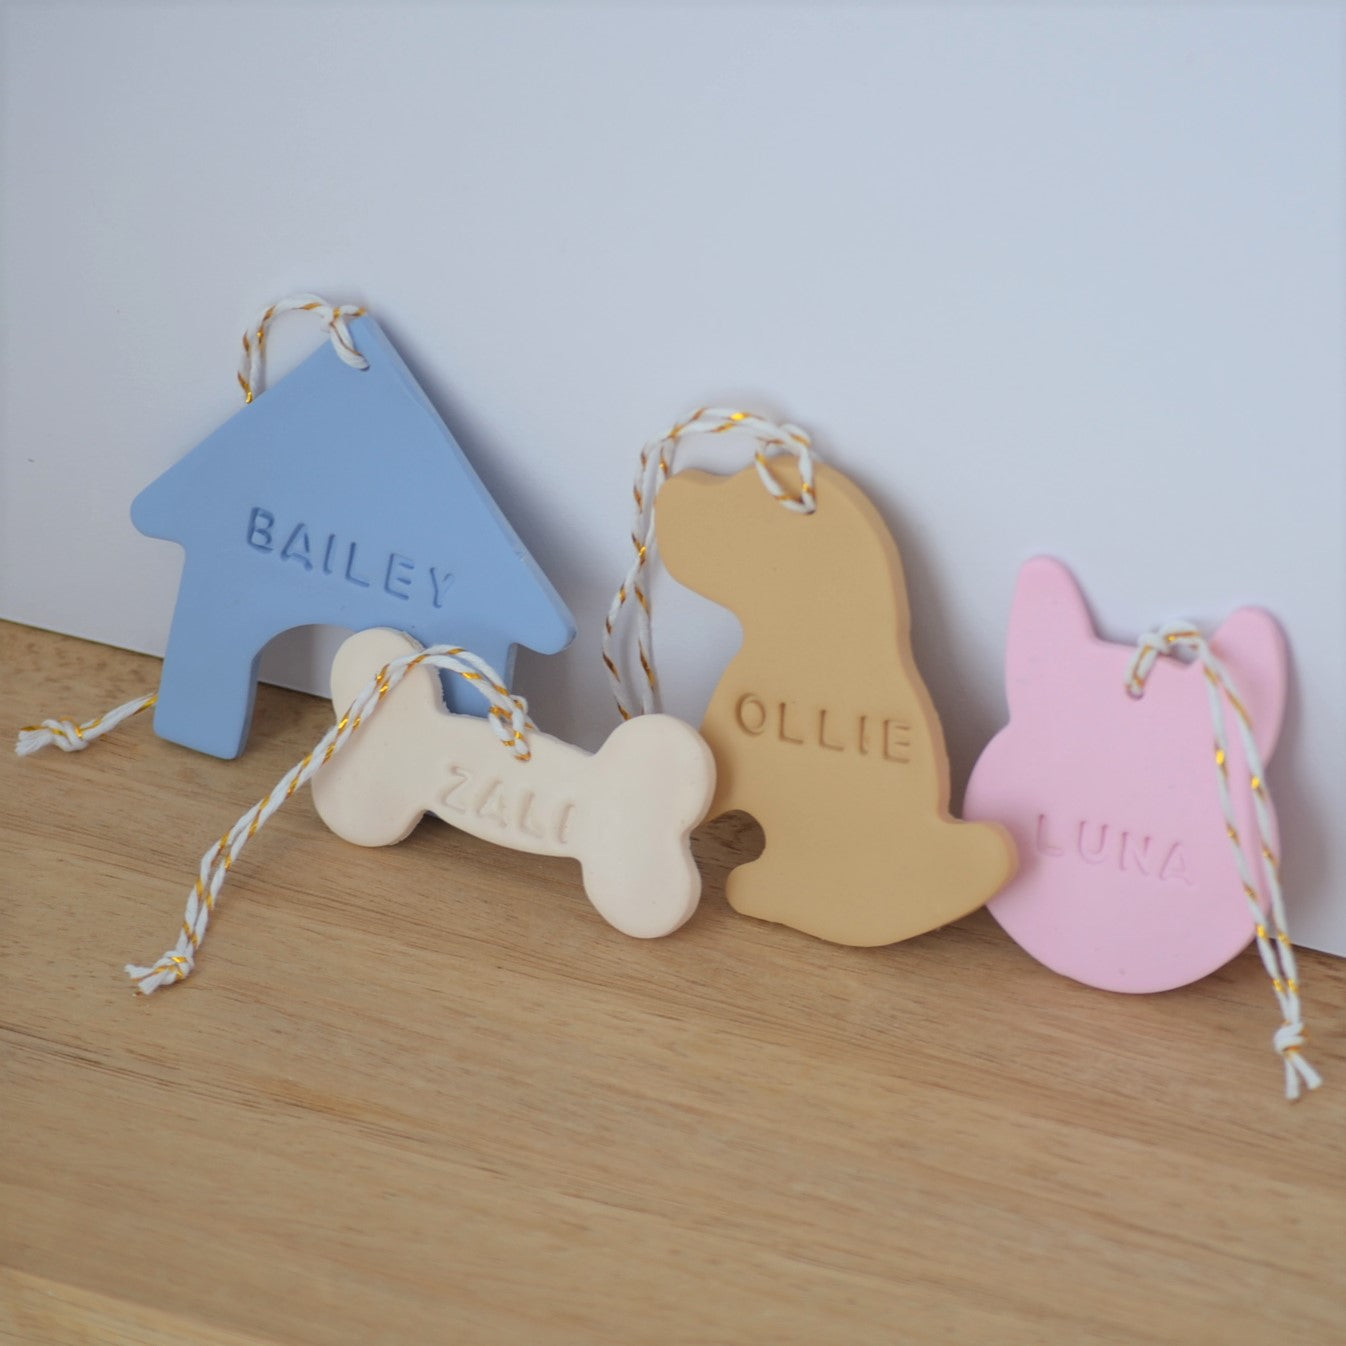 Group of 4 personalized pet name ornaments